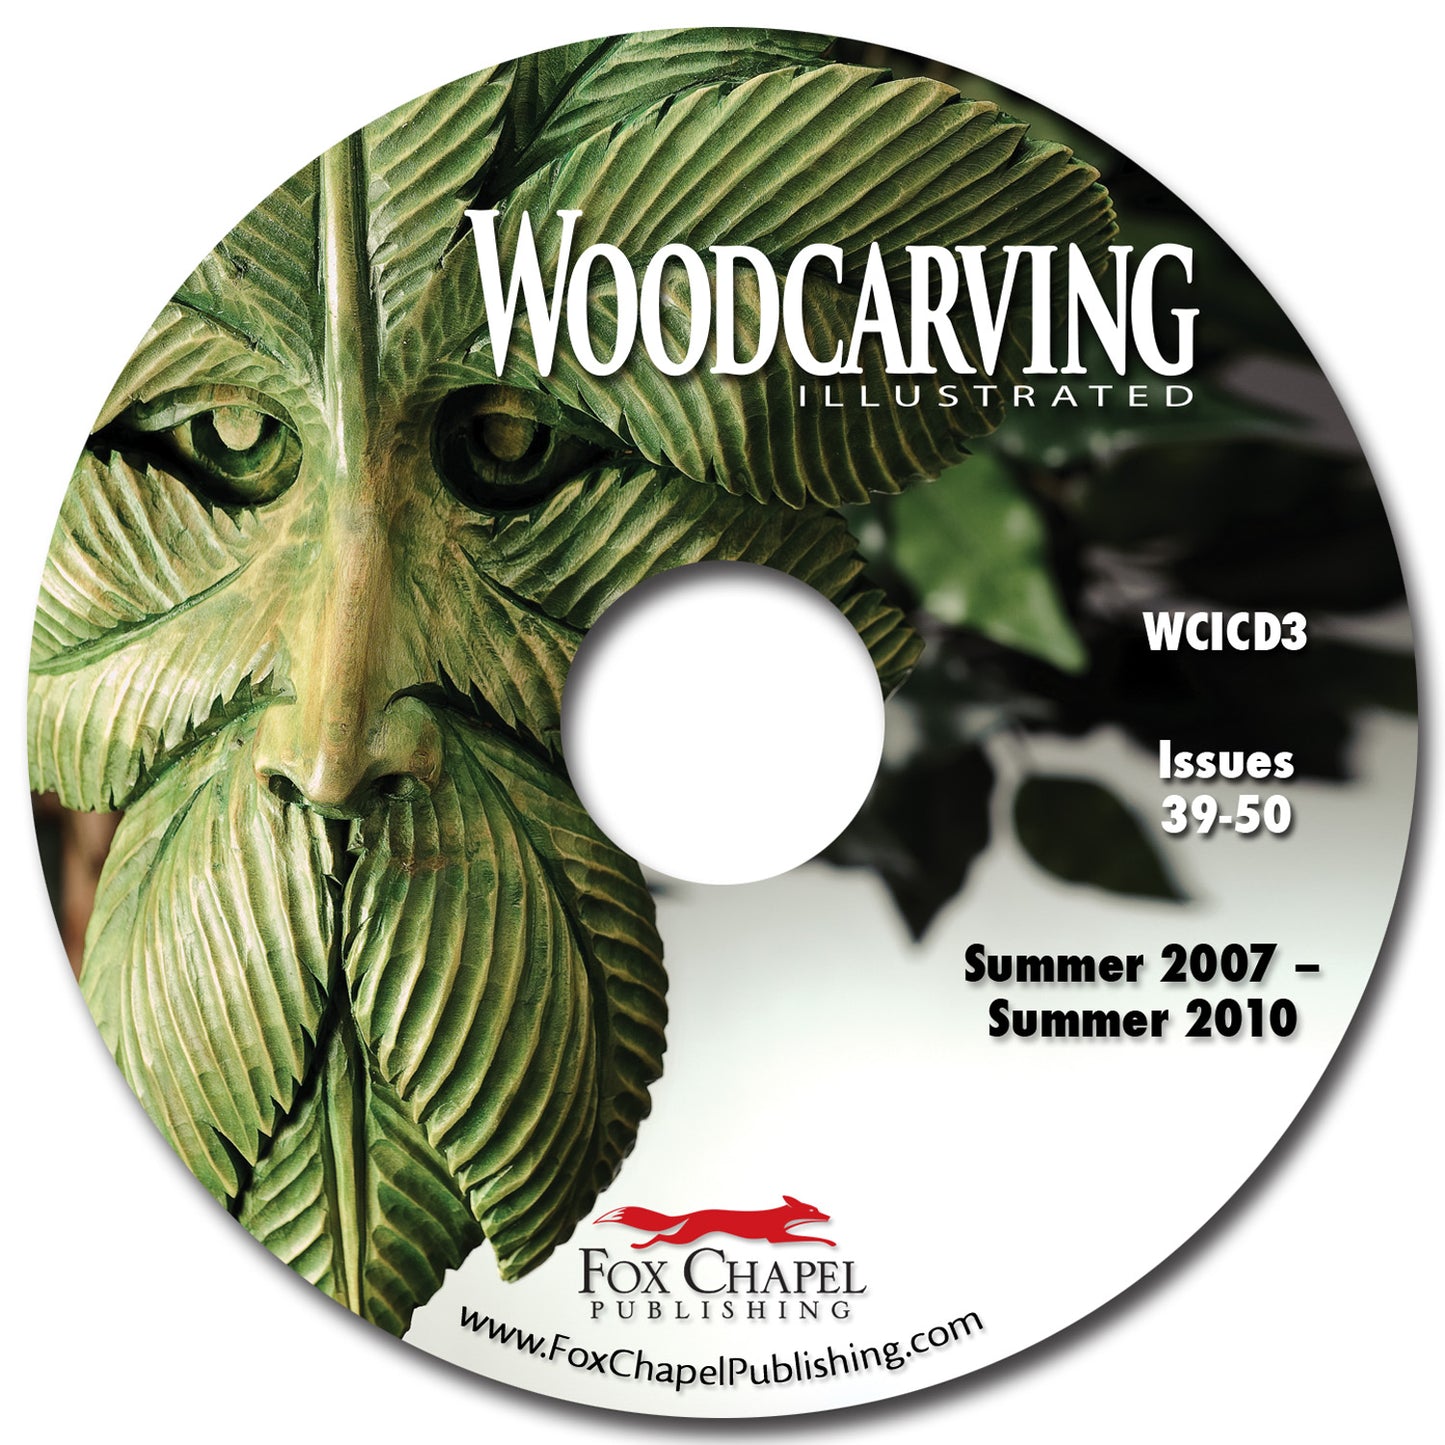 Woodcarving Illustrated Archive CD Volume 3